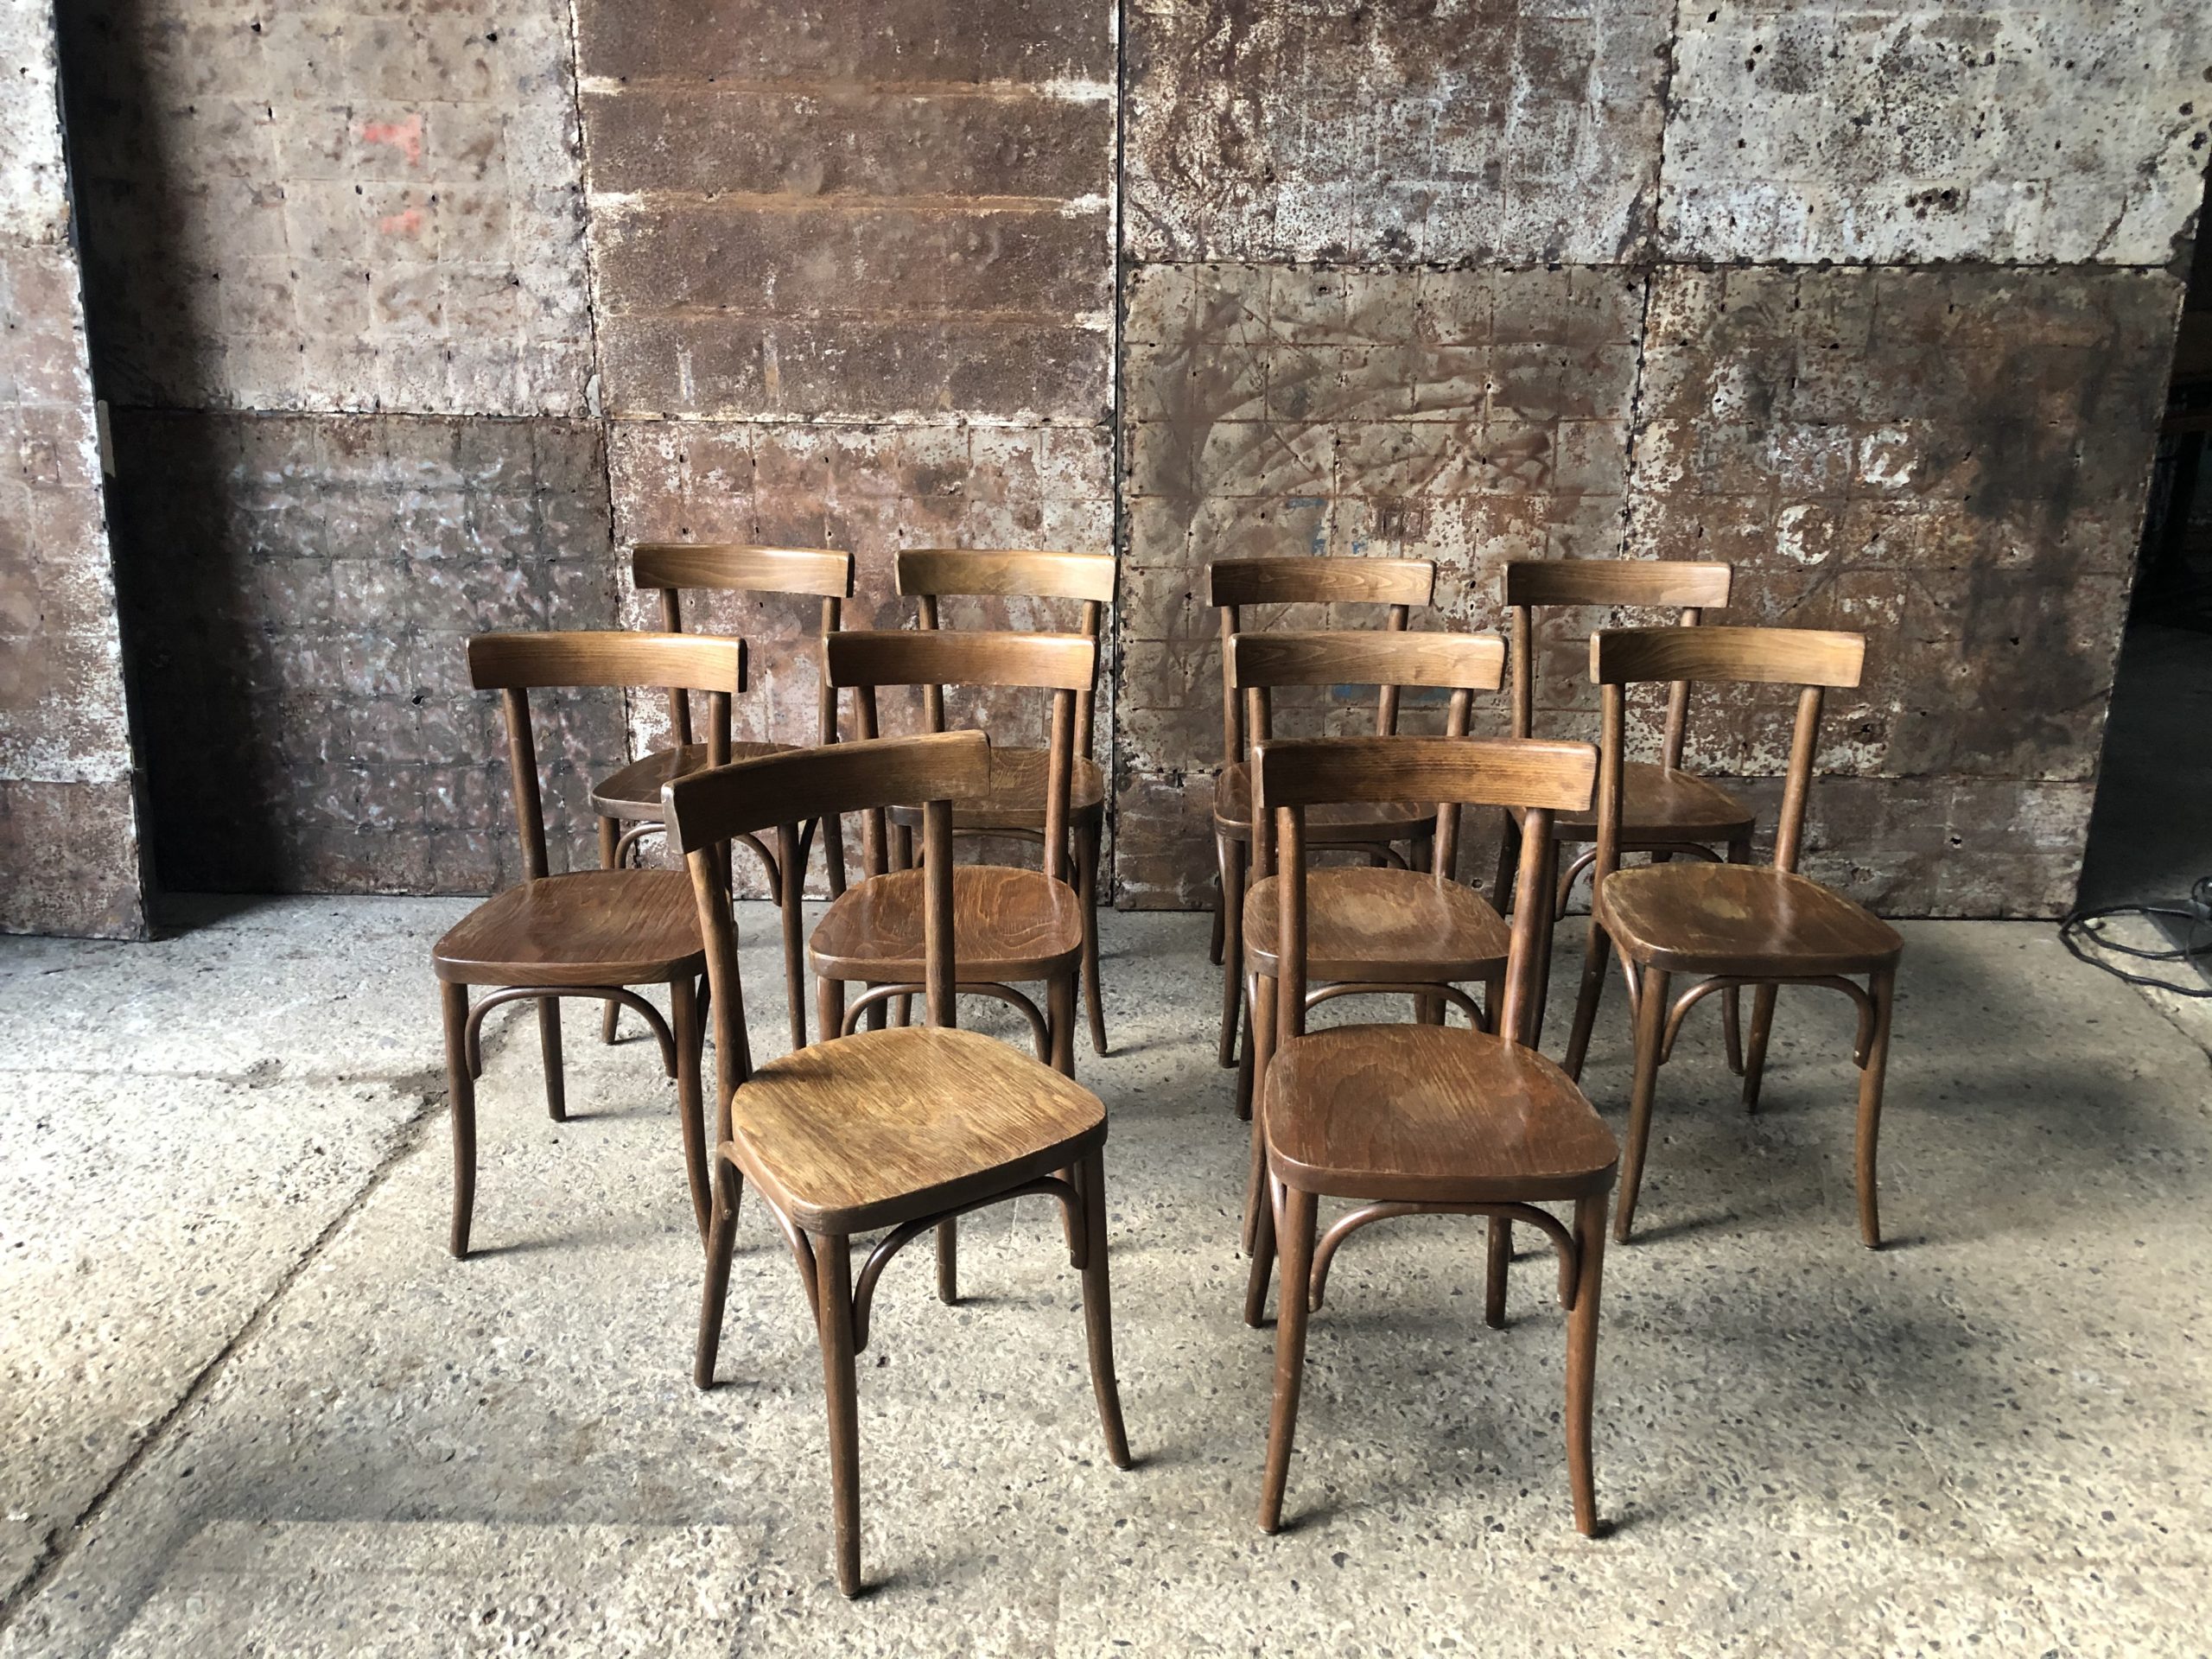 10 Chaises bistrot